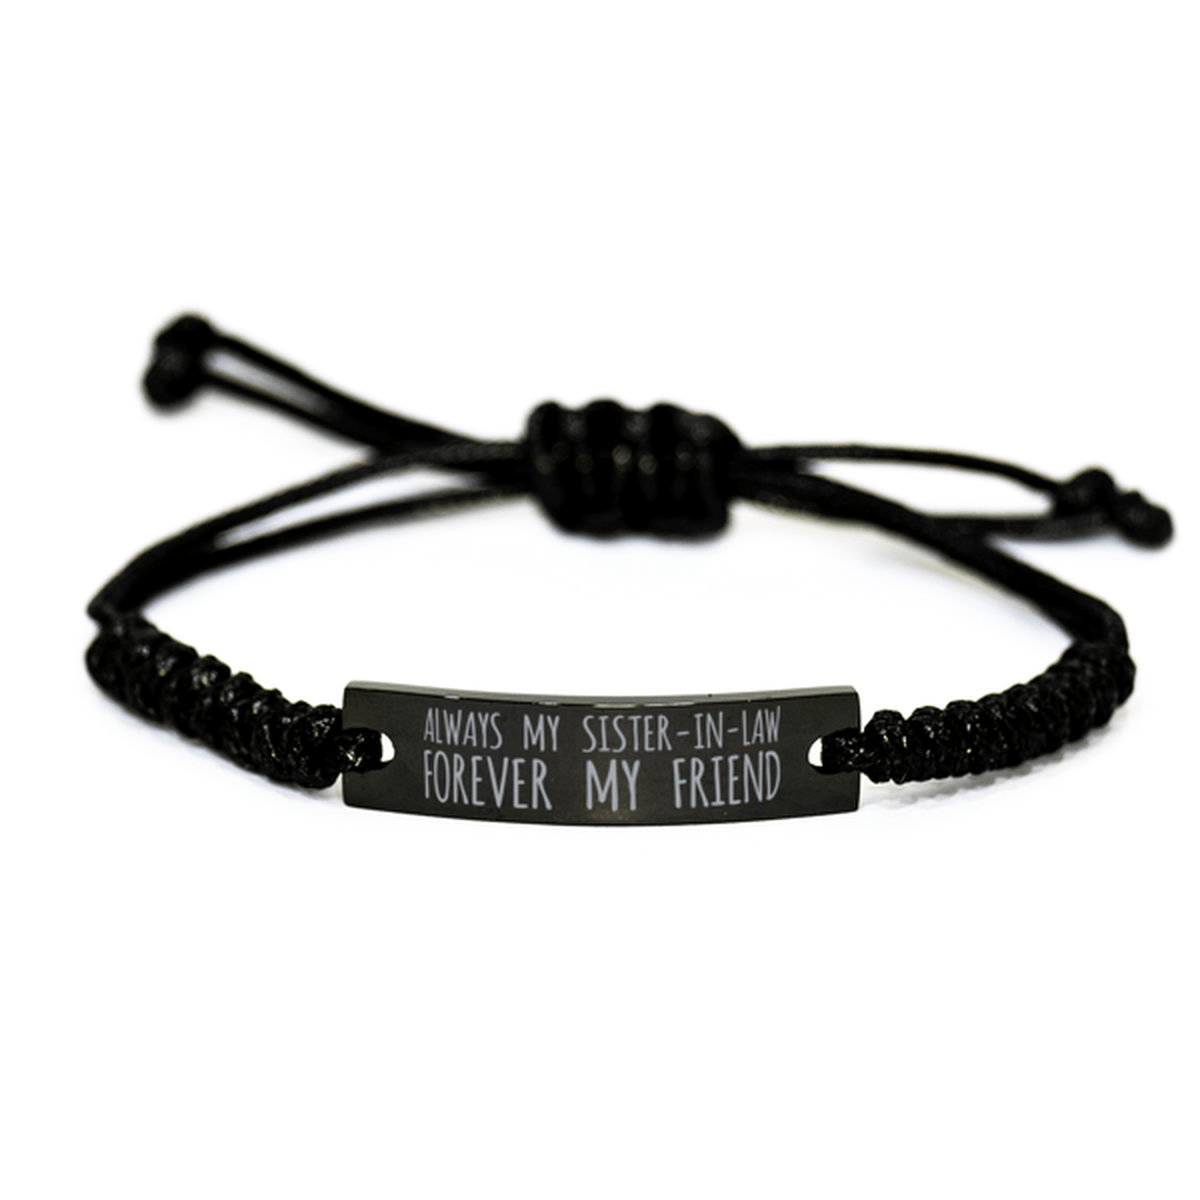 Inspirational Sister-In-Law Black Rope Bracelet, Always My Sister-In-Law Forever My Friend, Best Birthday Gifts For Family